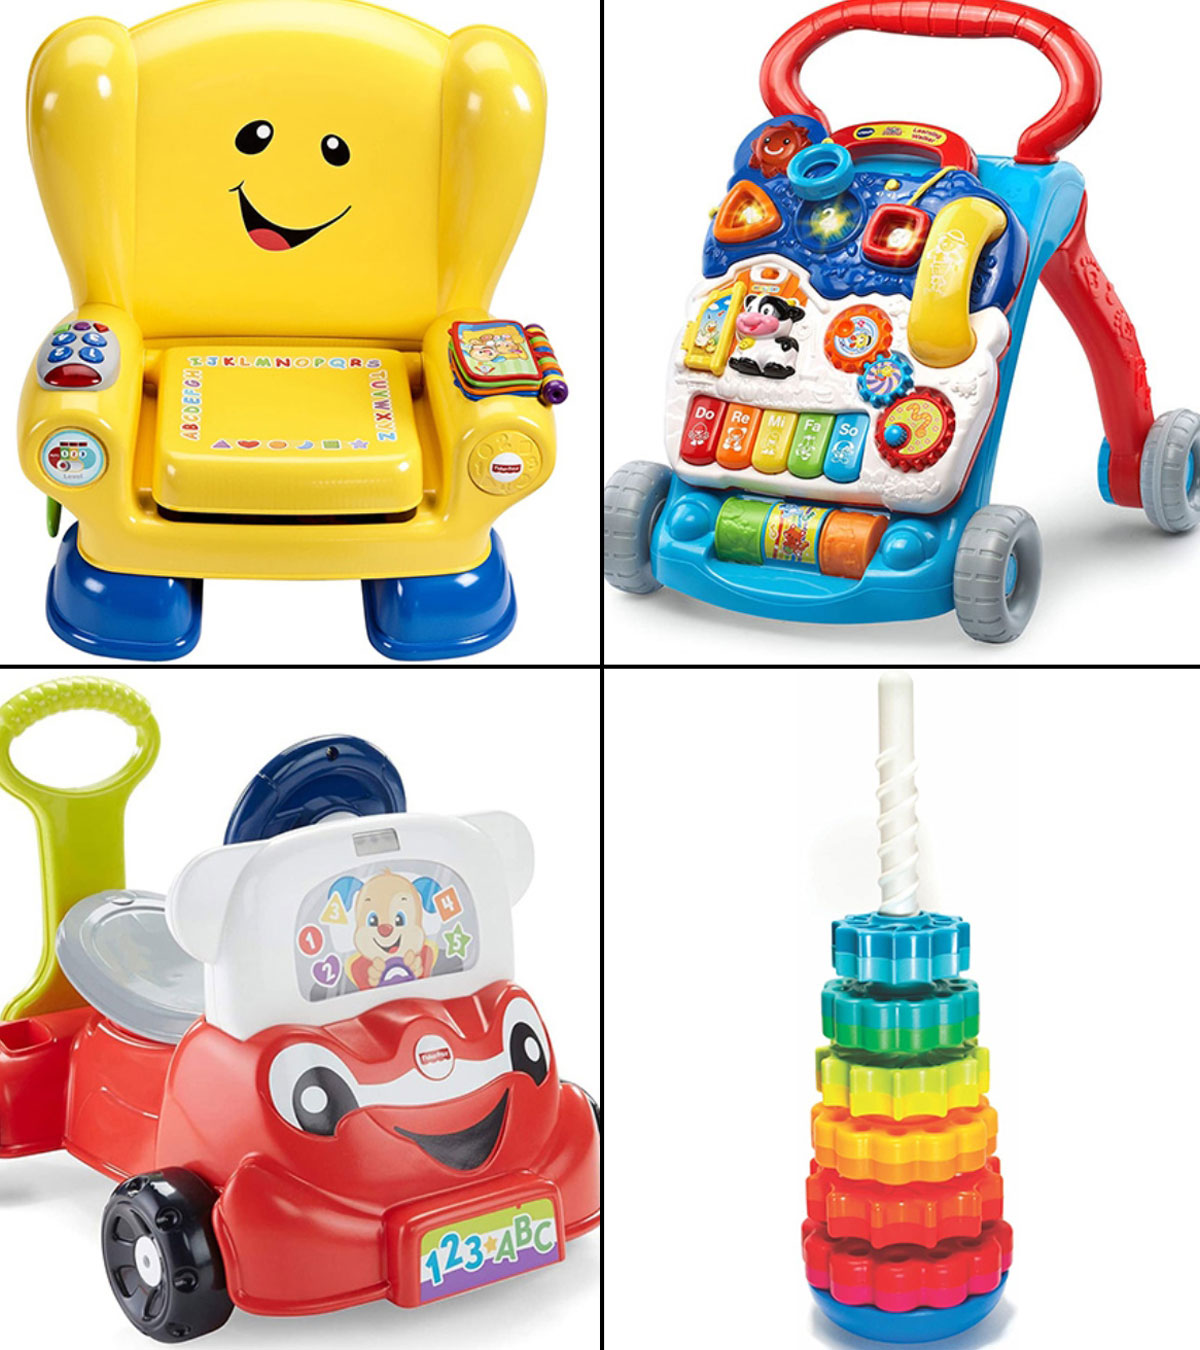 The Explorer Play Kit, 9- to 10-Month-Old Baby Toys